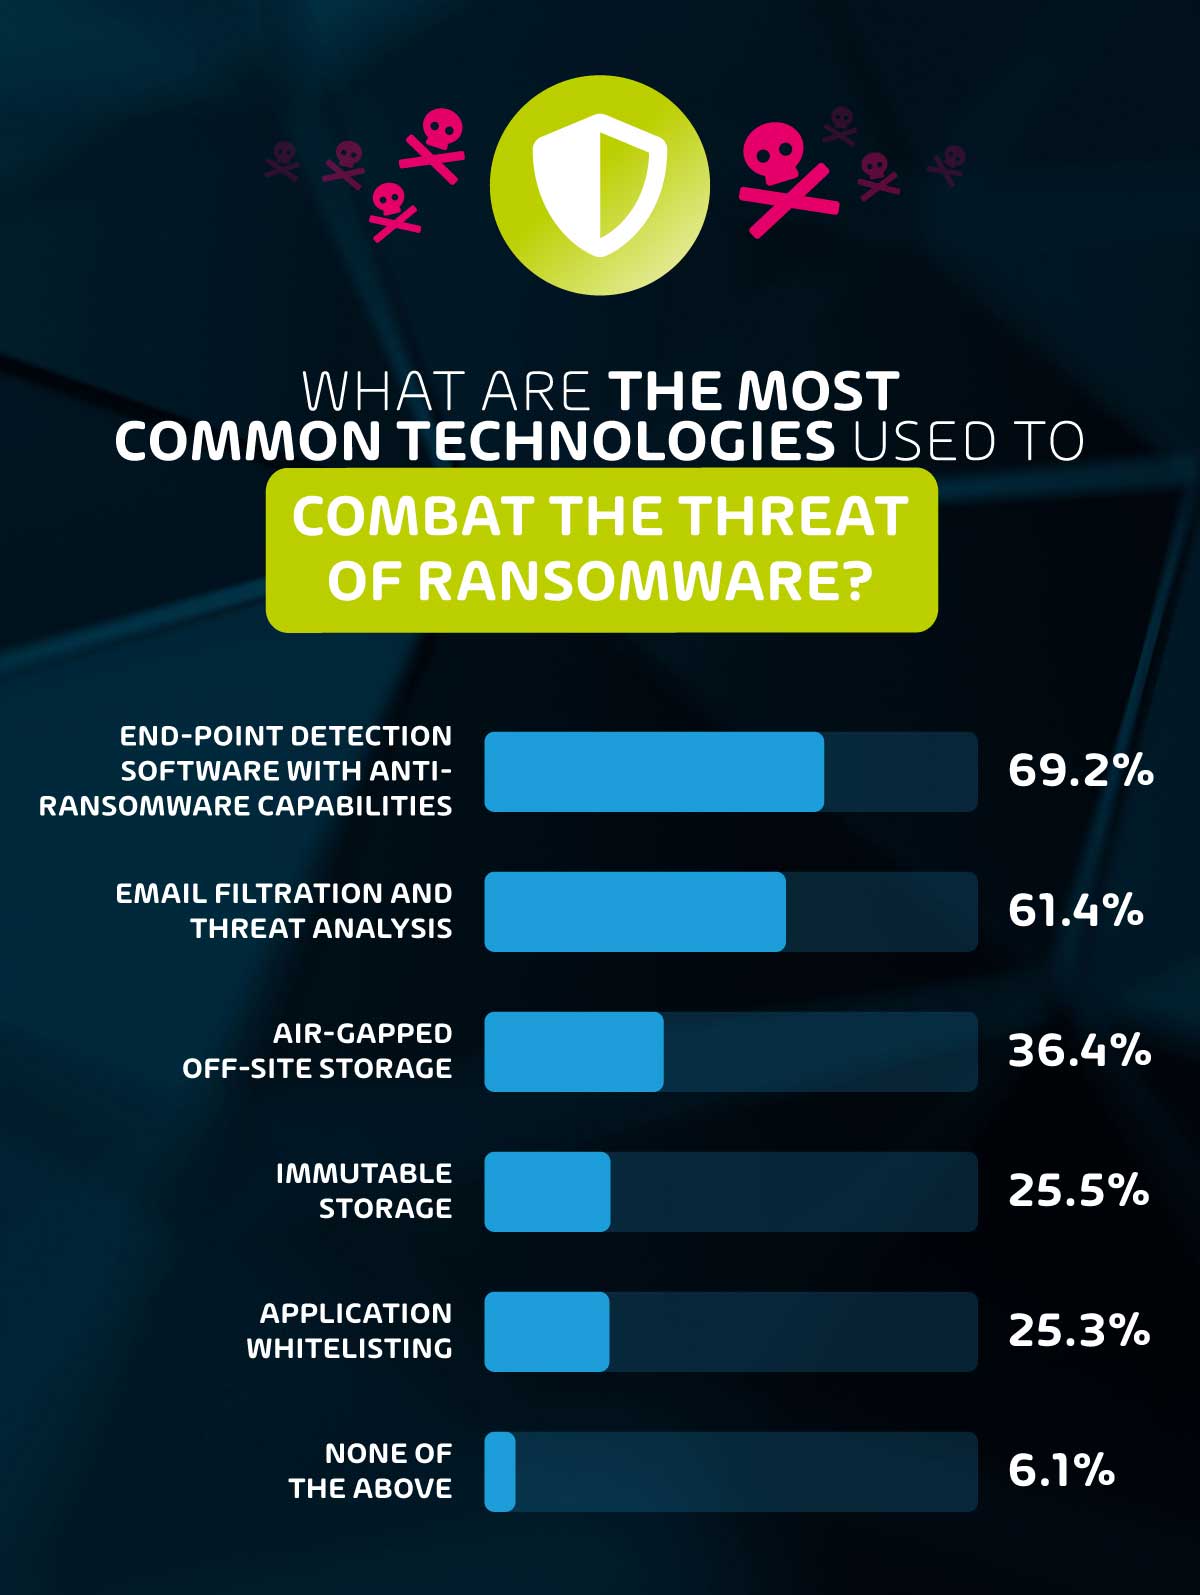 Most Commonly used Technology to combat the Threat of Ransomware Attacks